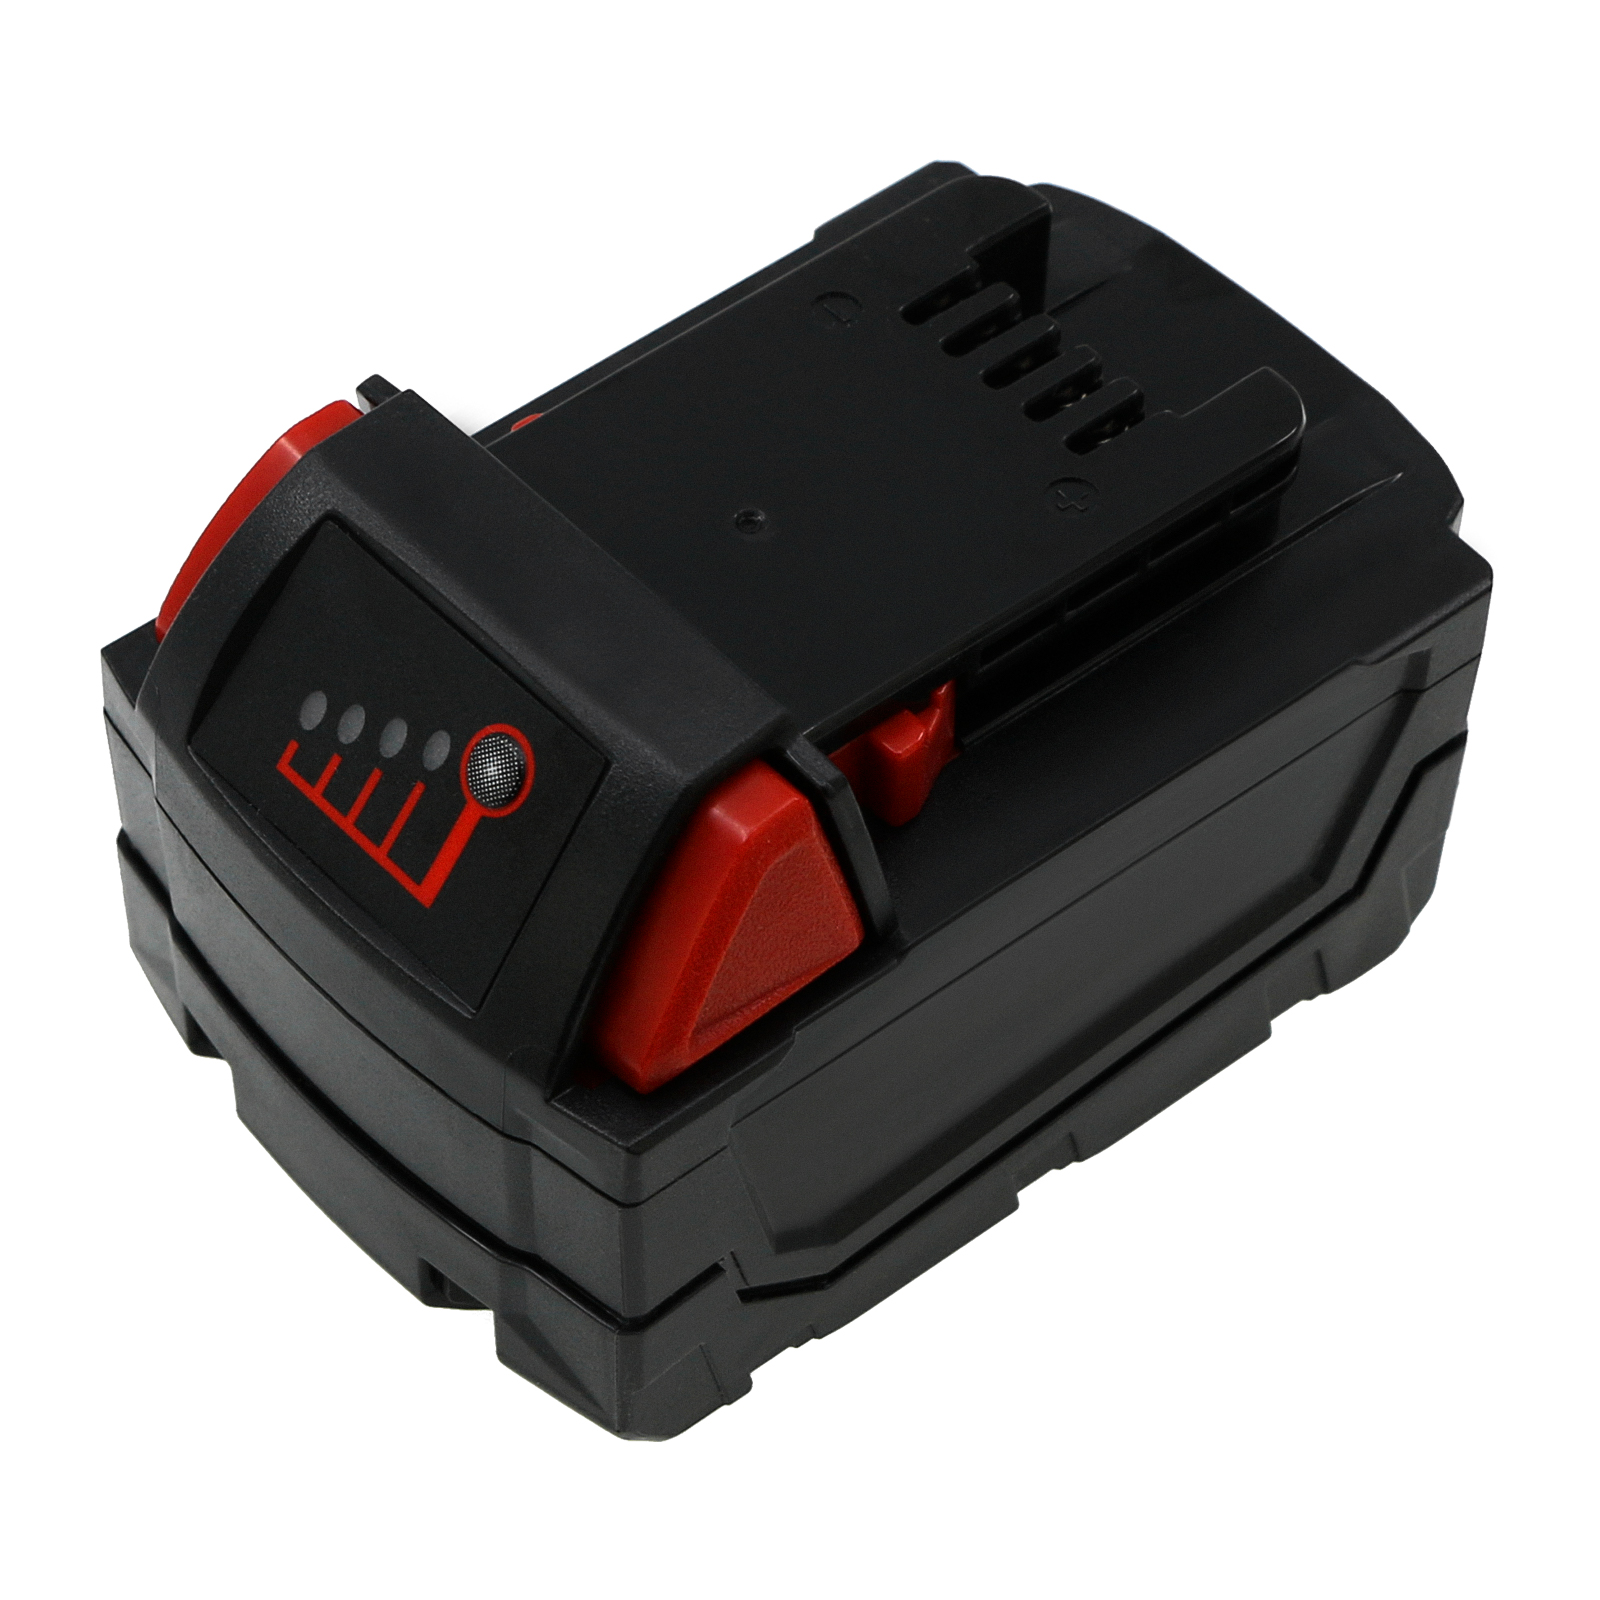 Synergy Digital Strapping Tools Battery, Compatible with Fromm N5-4349 Strapping Tools Battery (Li-ion, 18V, 4000mAh)